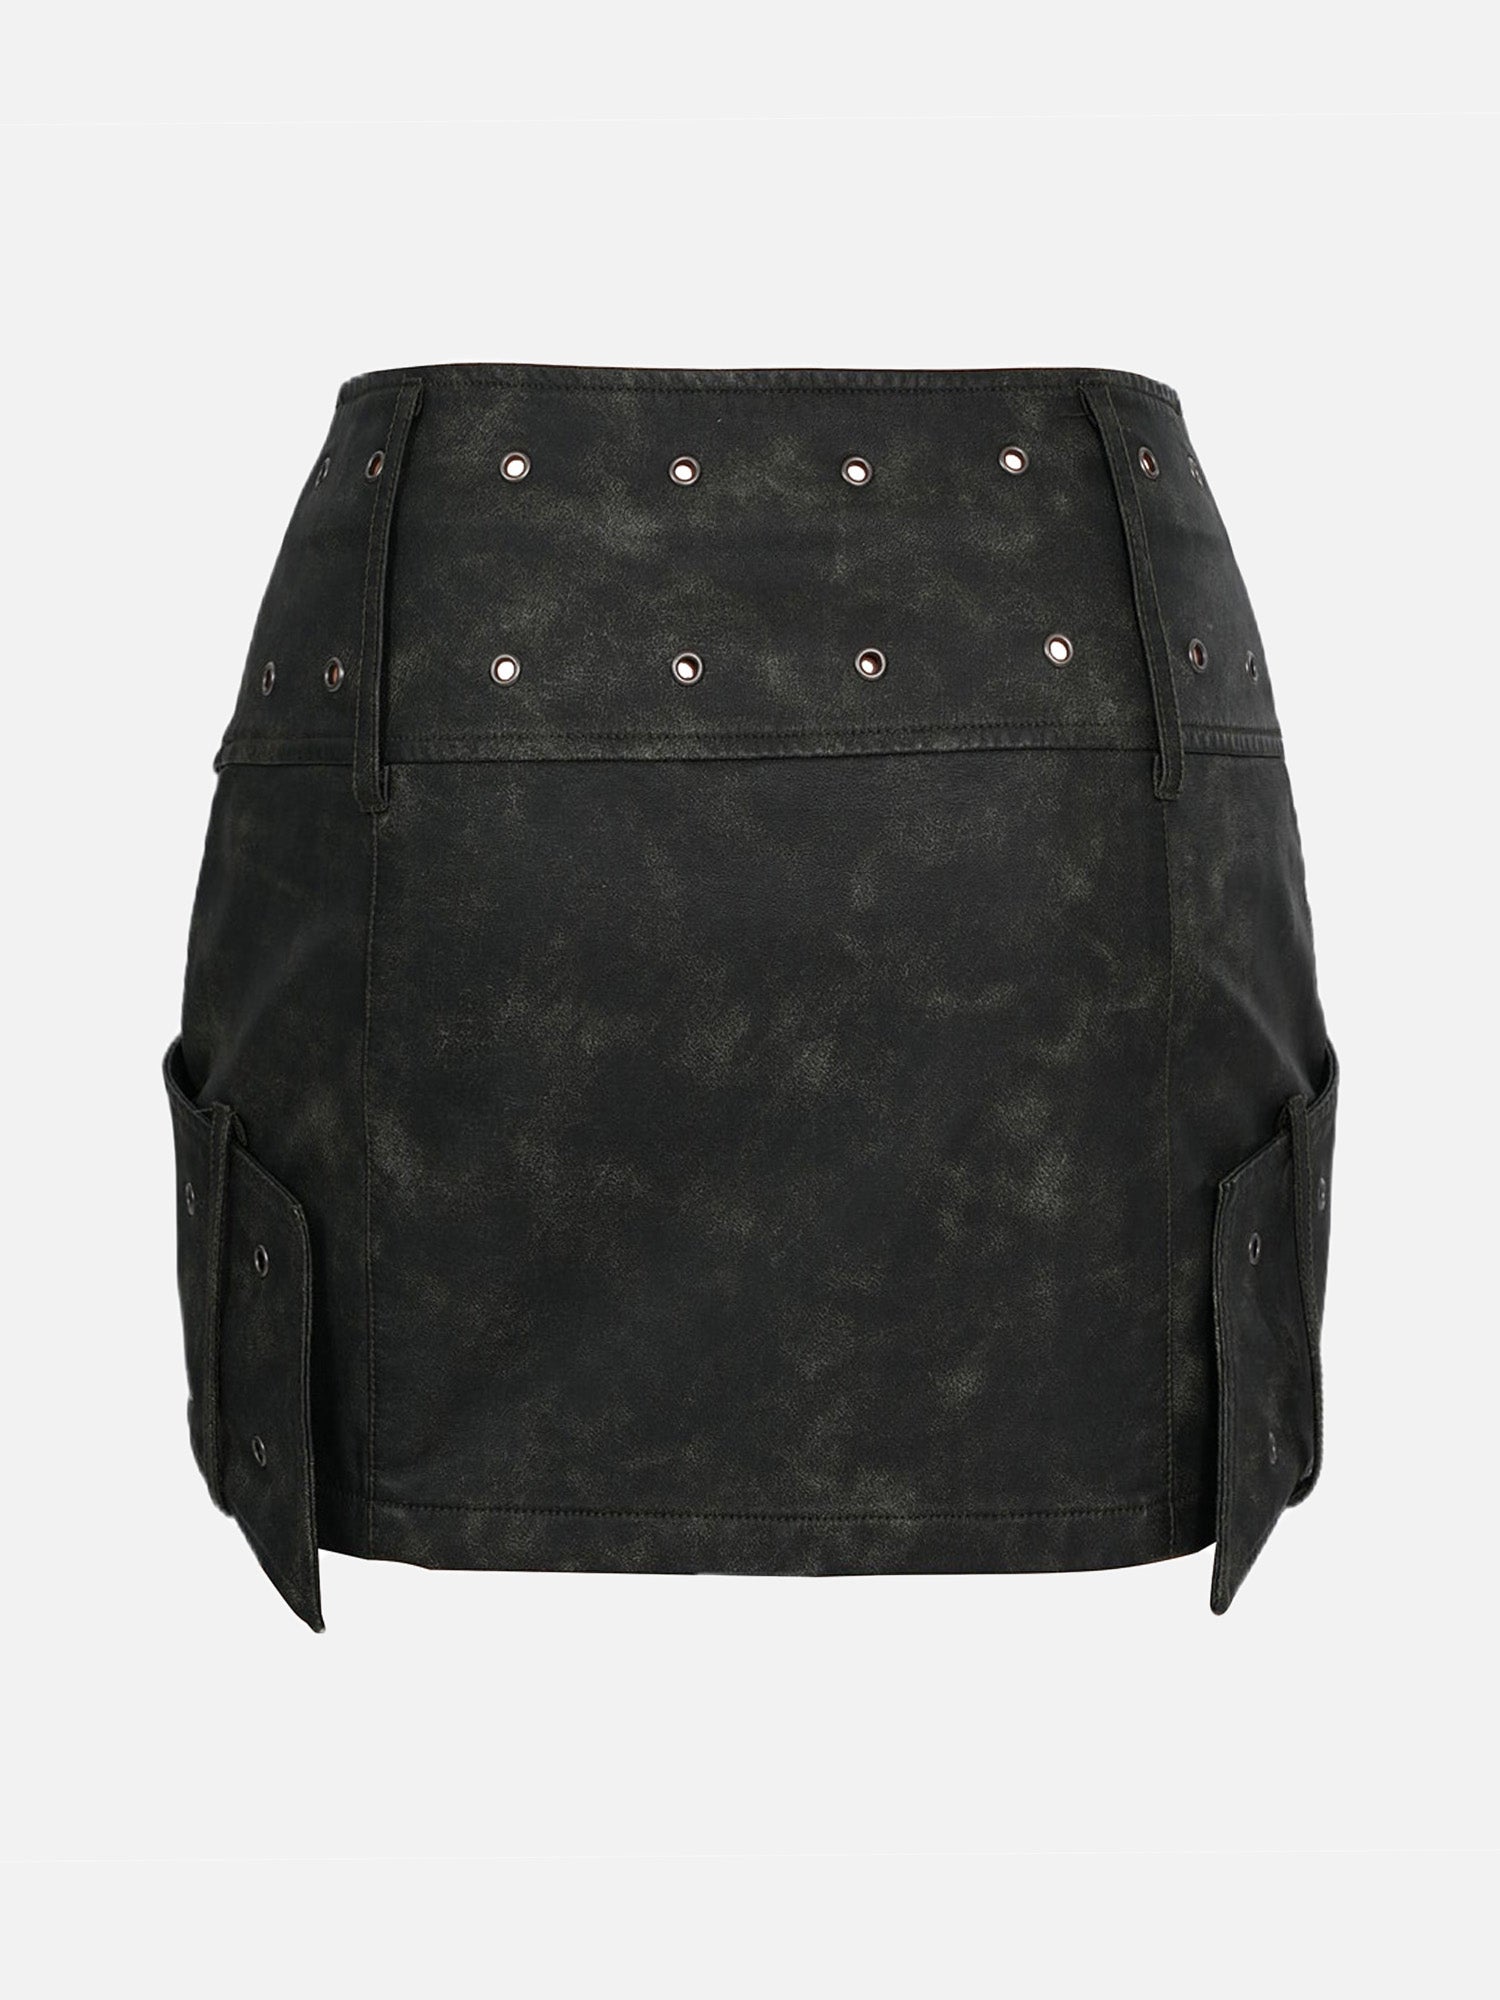 Thesupermade Retro Metal Buckle Cross Washed Leather Skirt